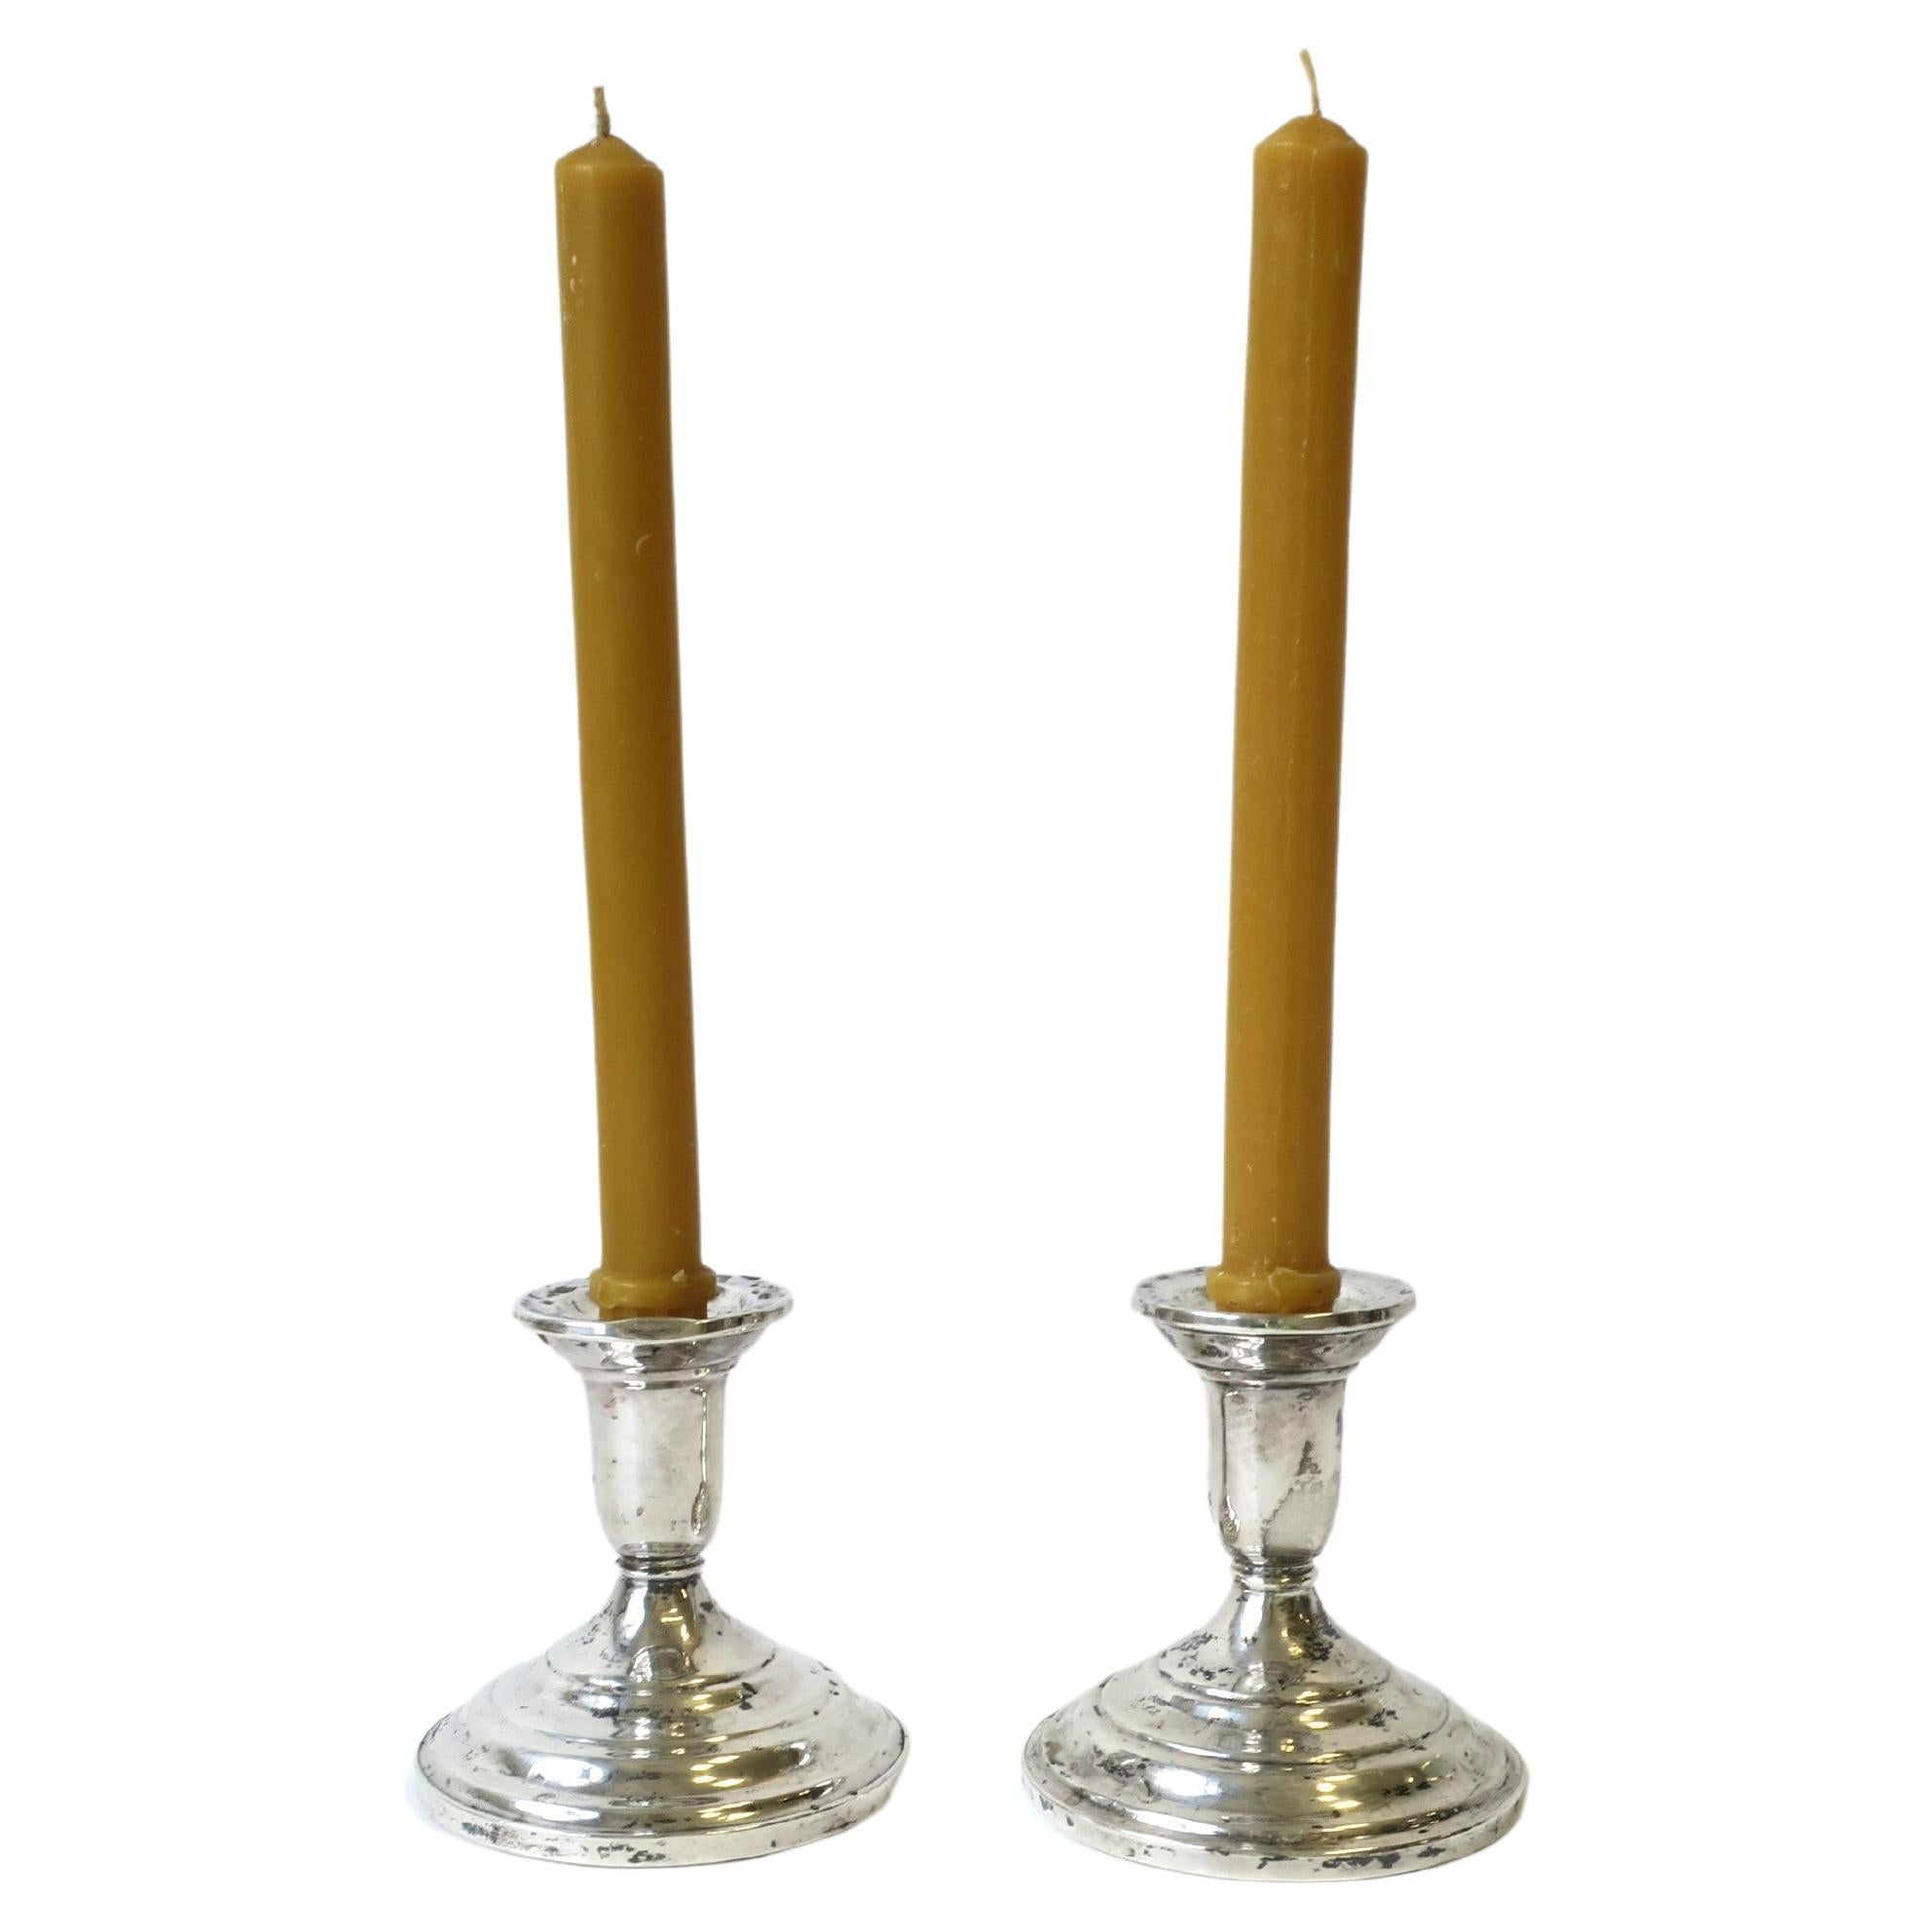 Sterling Silver Candlesticks Candlestick Holders, Pair, circa 1960s